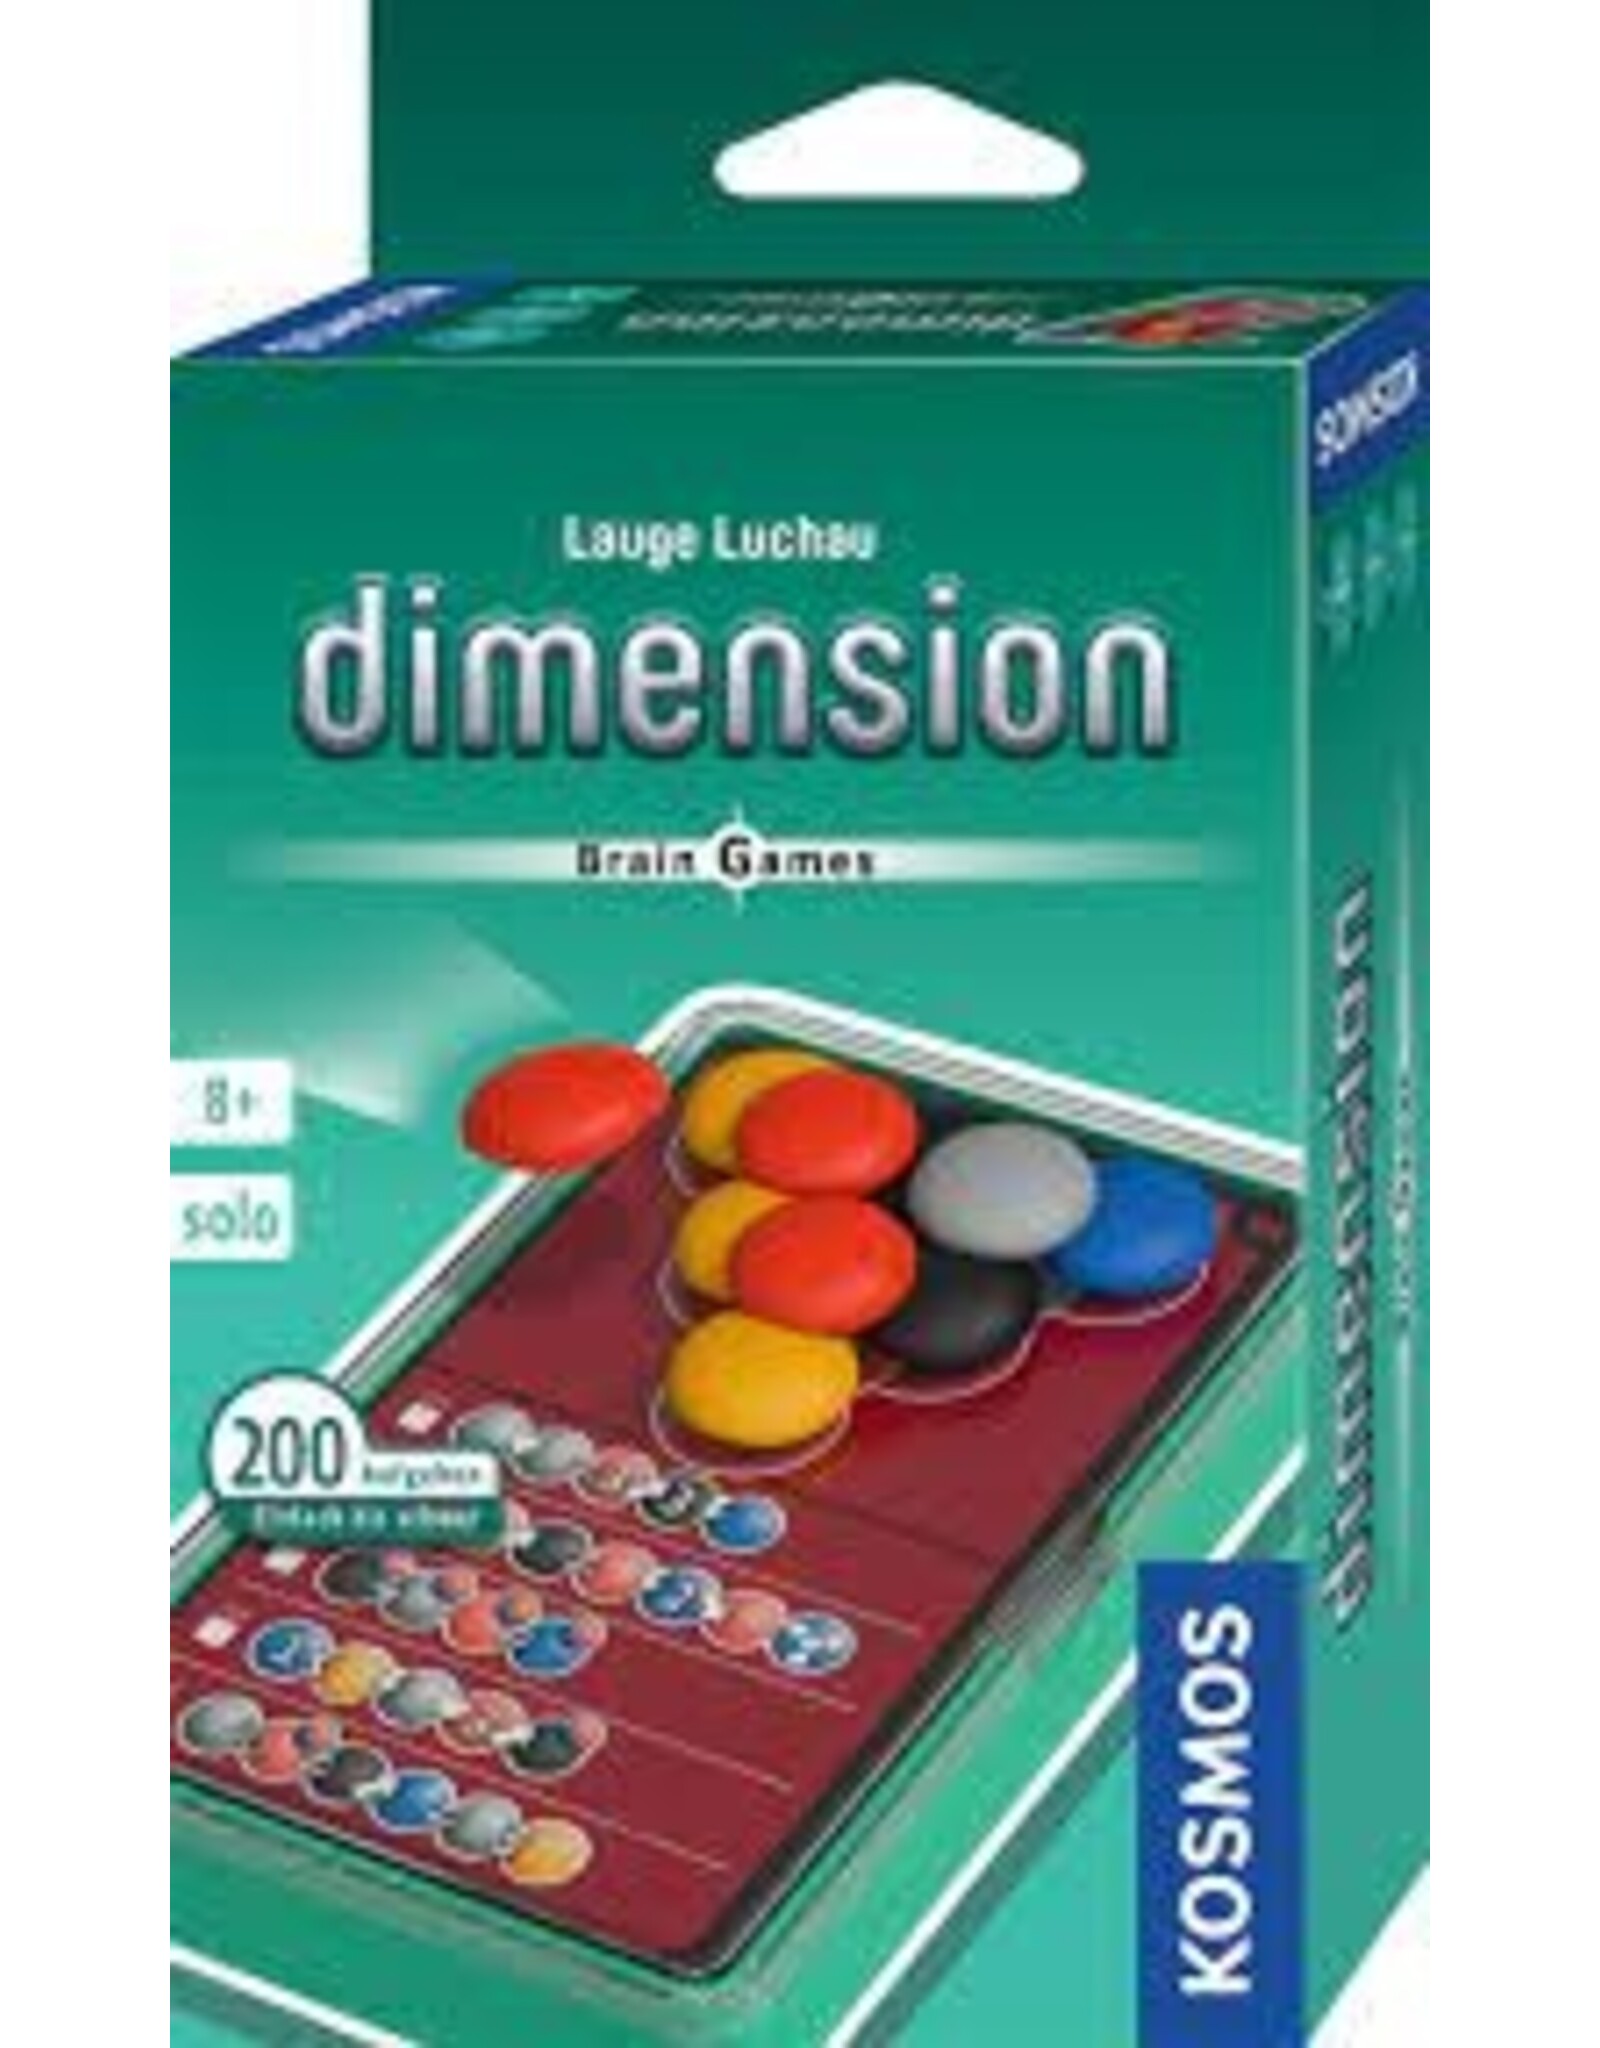 Dimension: The Brain Game to Go